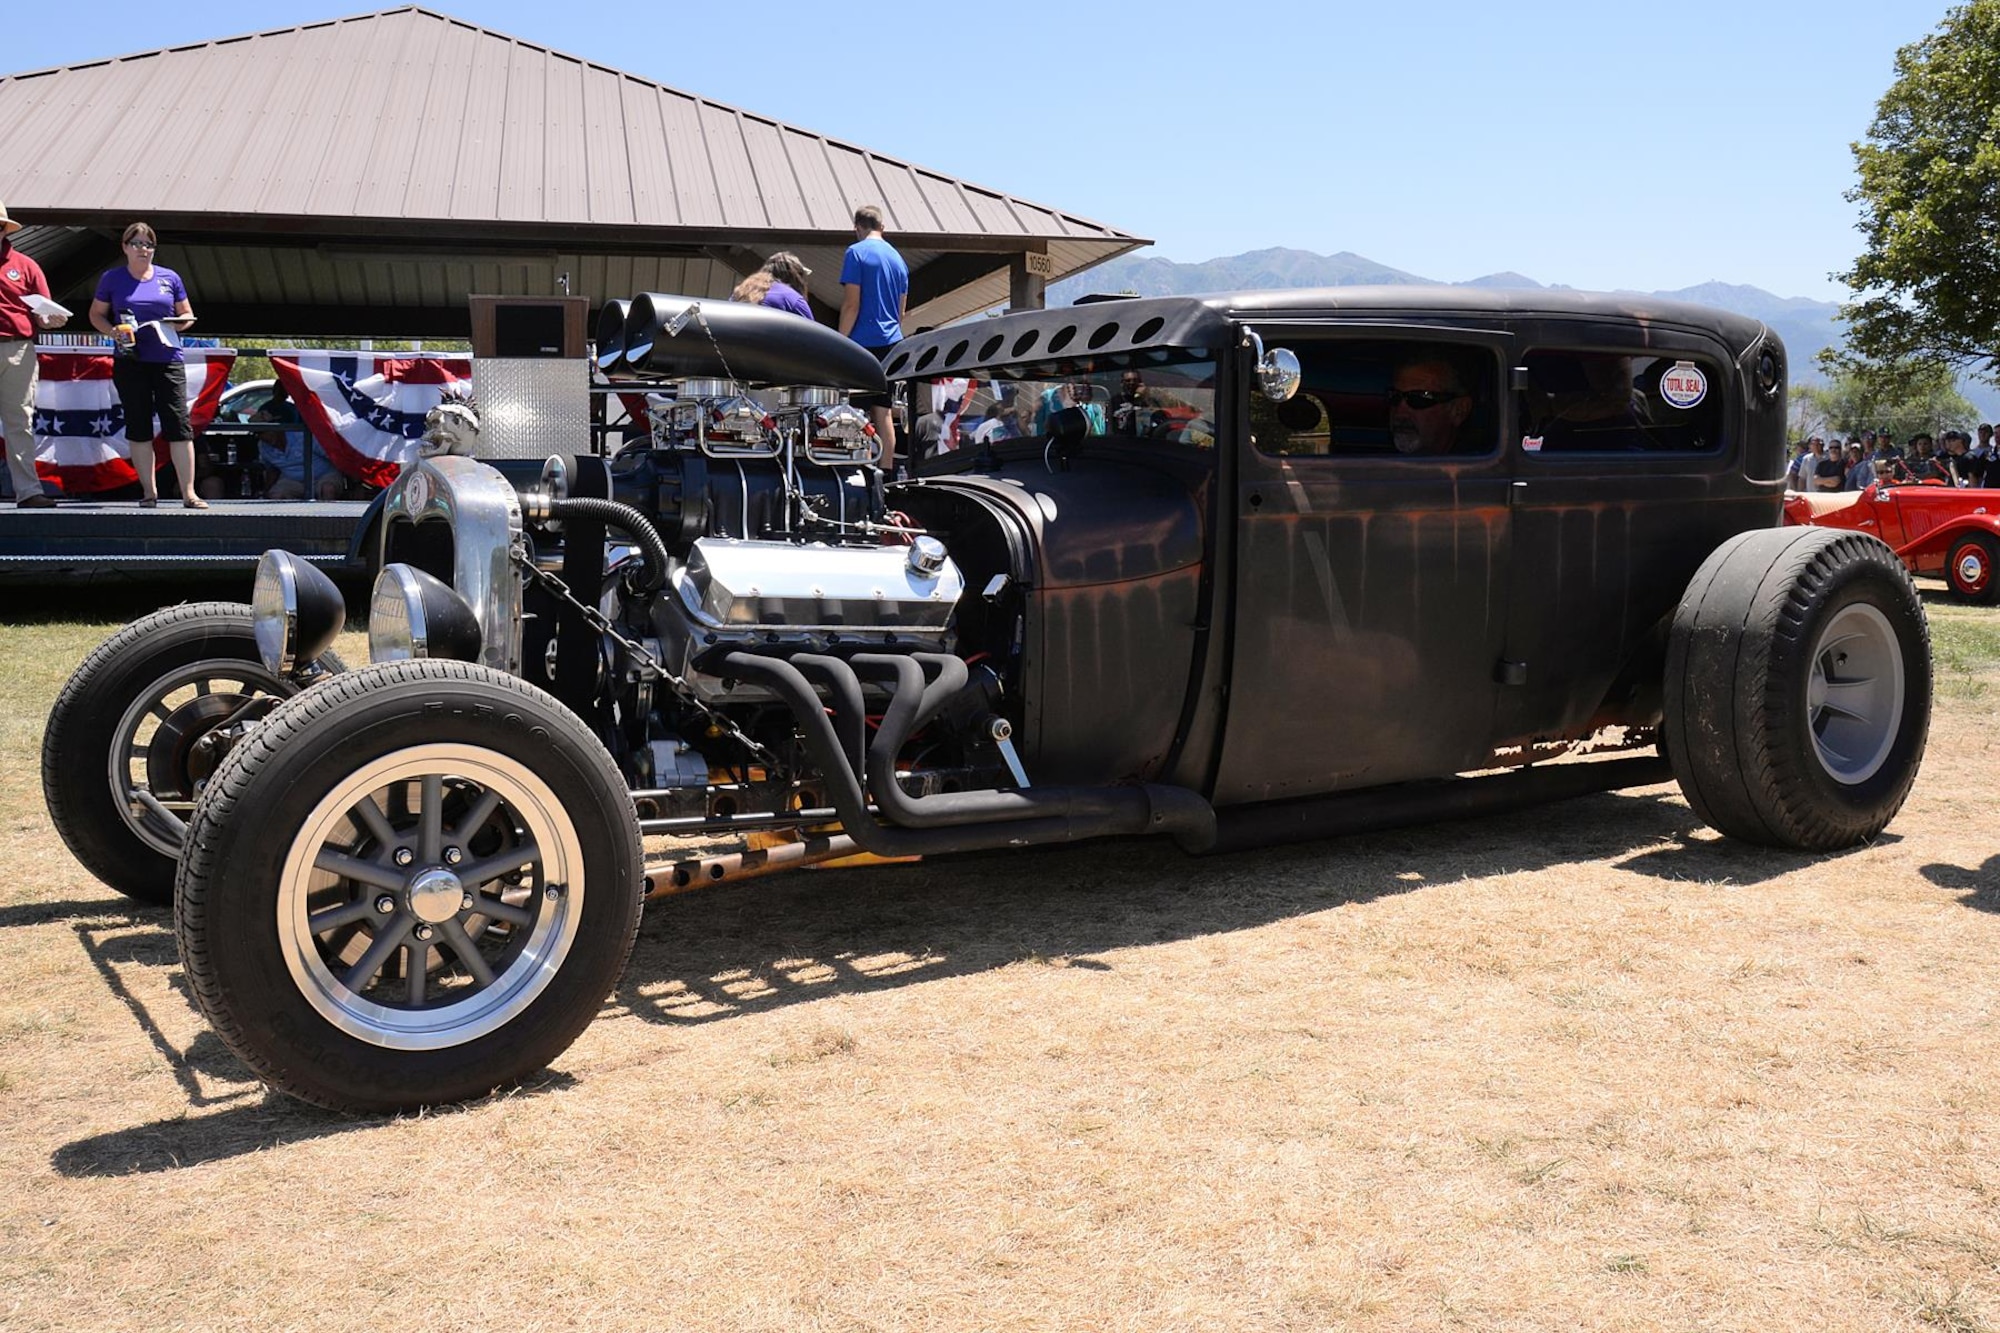 Rick Shelton, 572nd Aircraft Maintenance Squadron, drives his 1929 Ford two-door sedan to the winner’s podium. The vehicle received the Best Custom/Owner built award. (U.S. Air Force photo by Alex R. Lloyd)